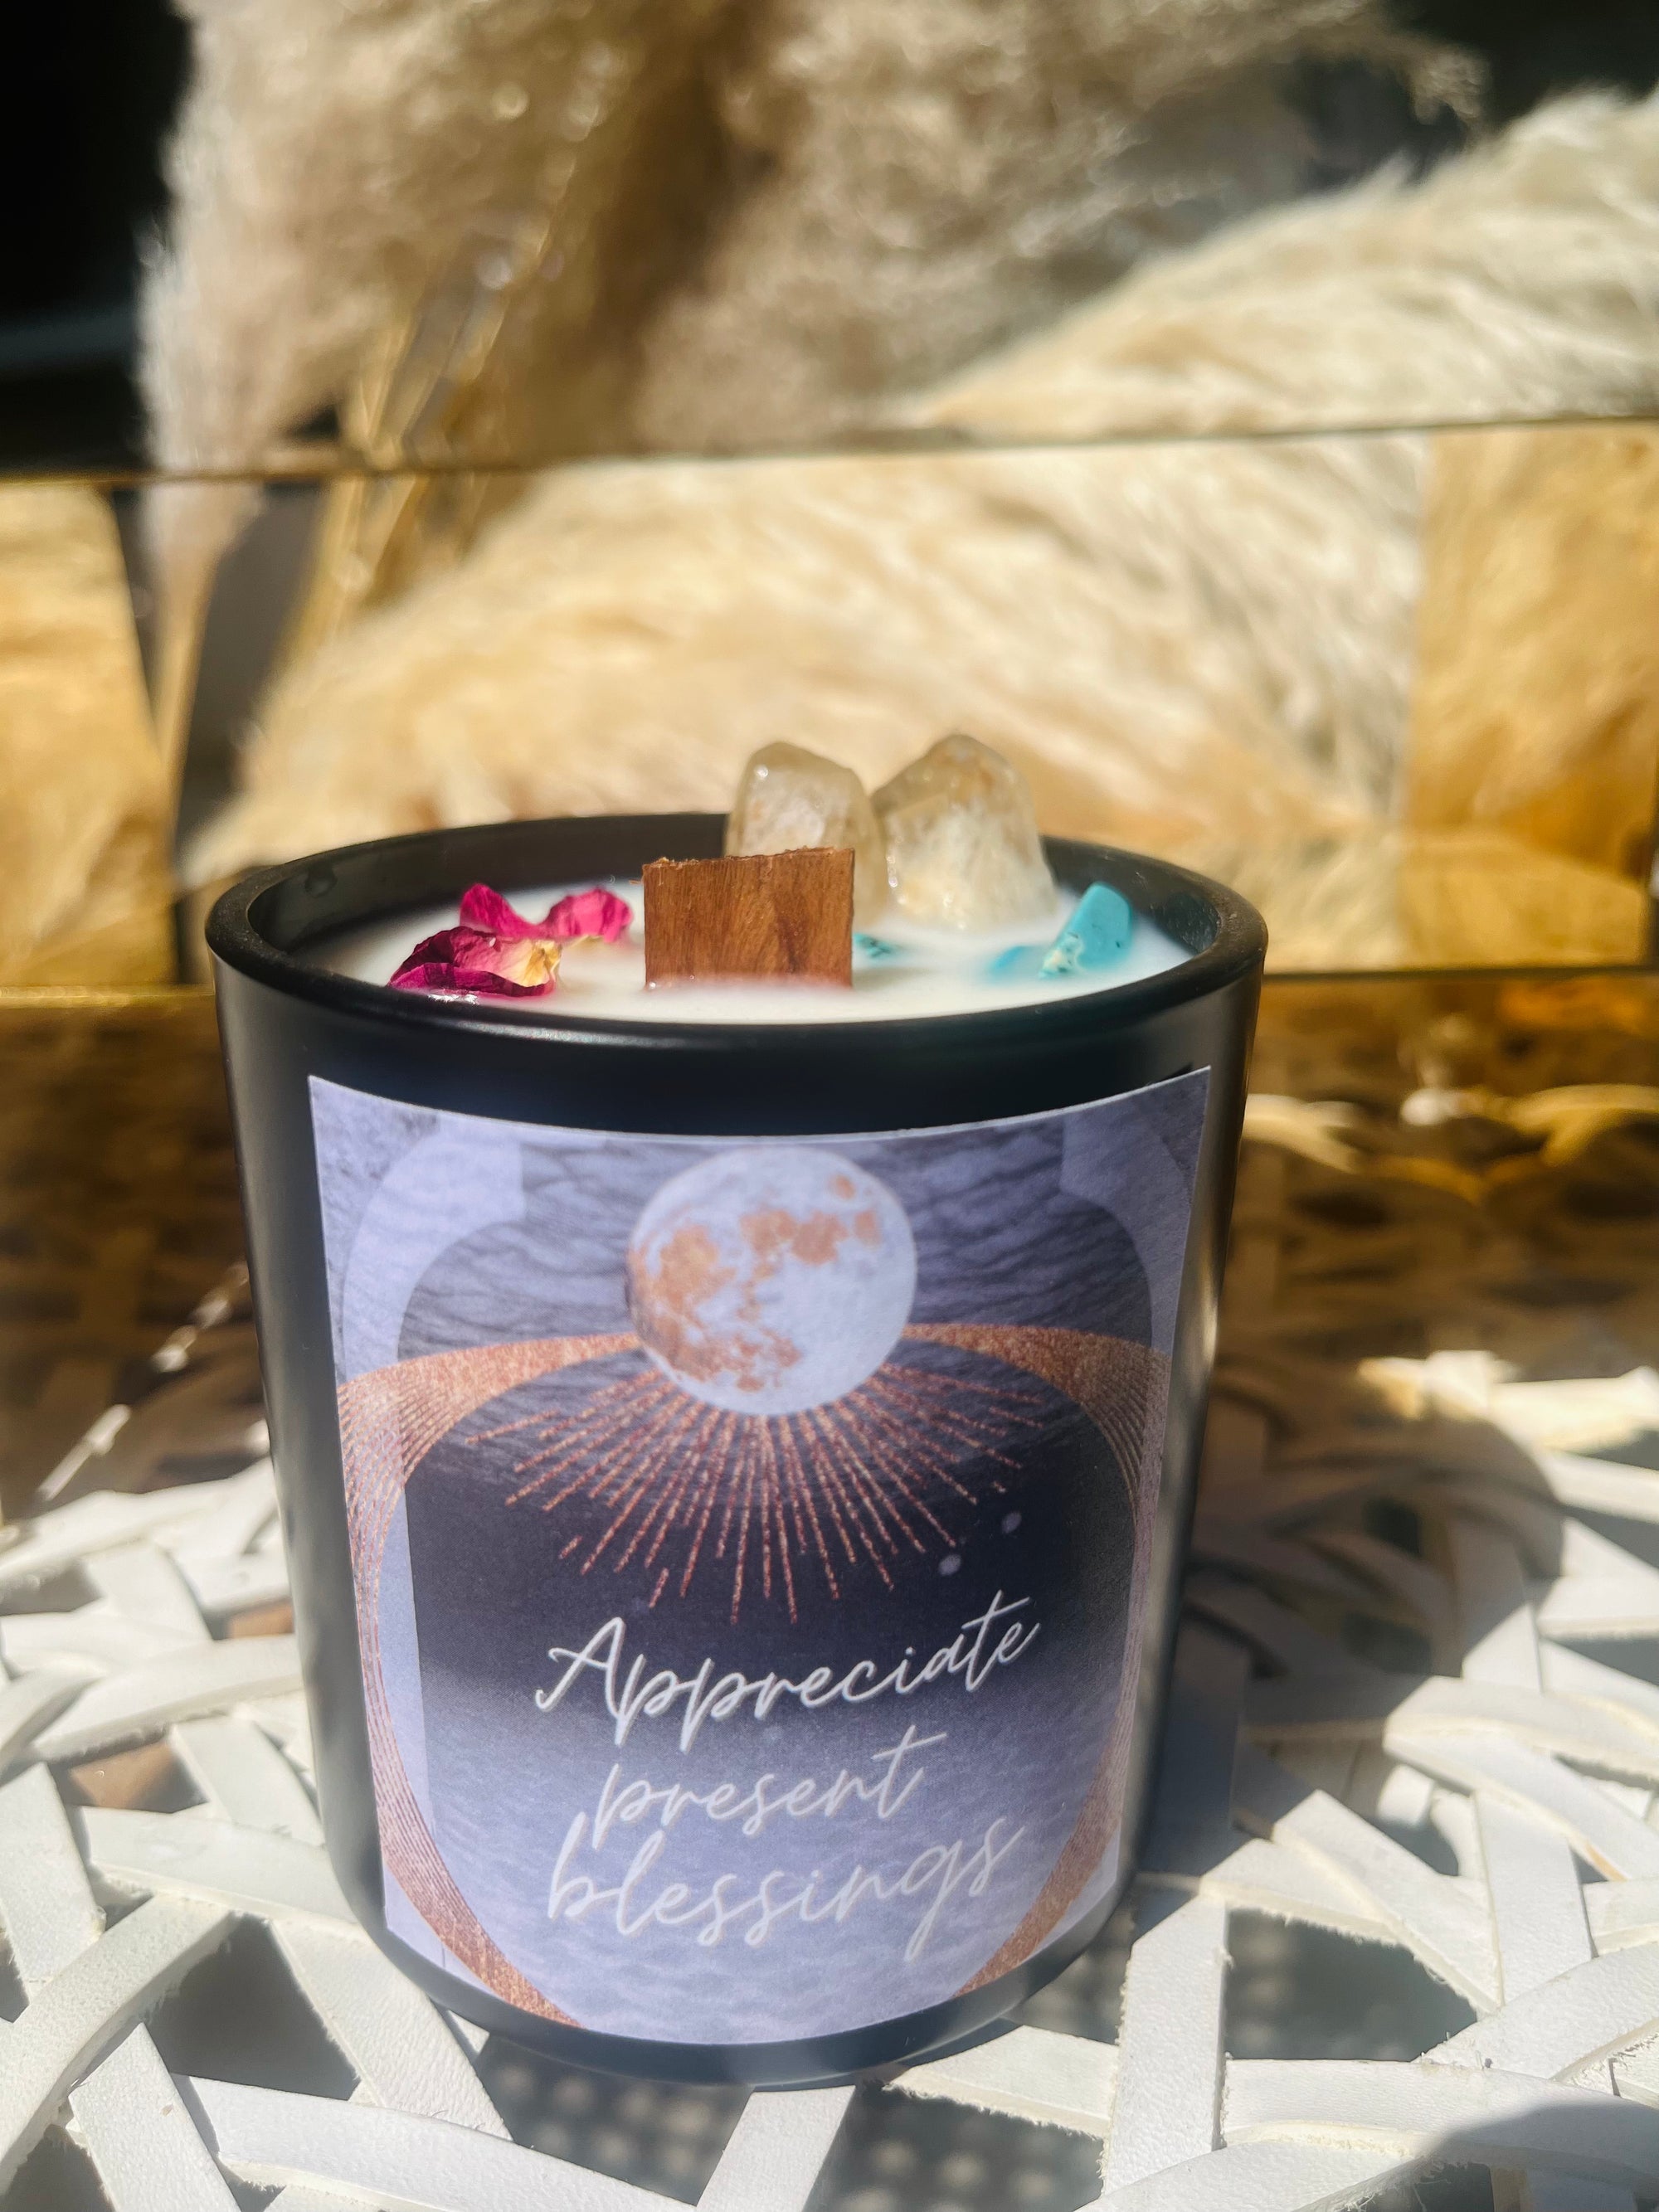 Intention Candle - Appreciate present blessings